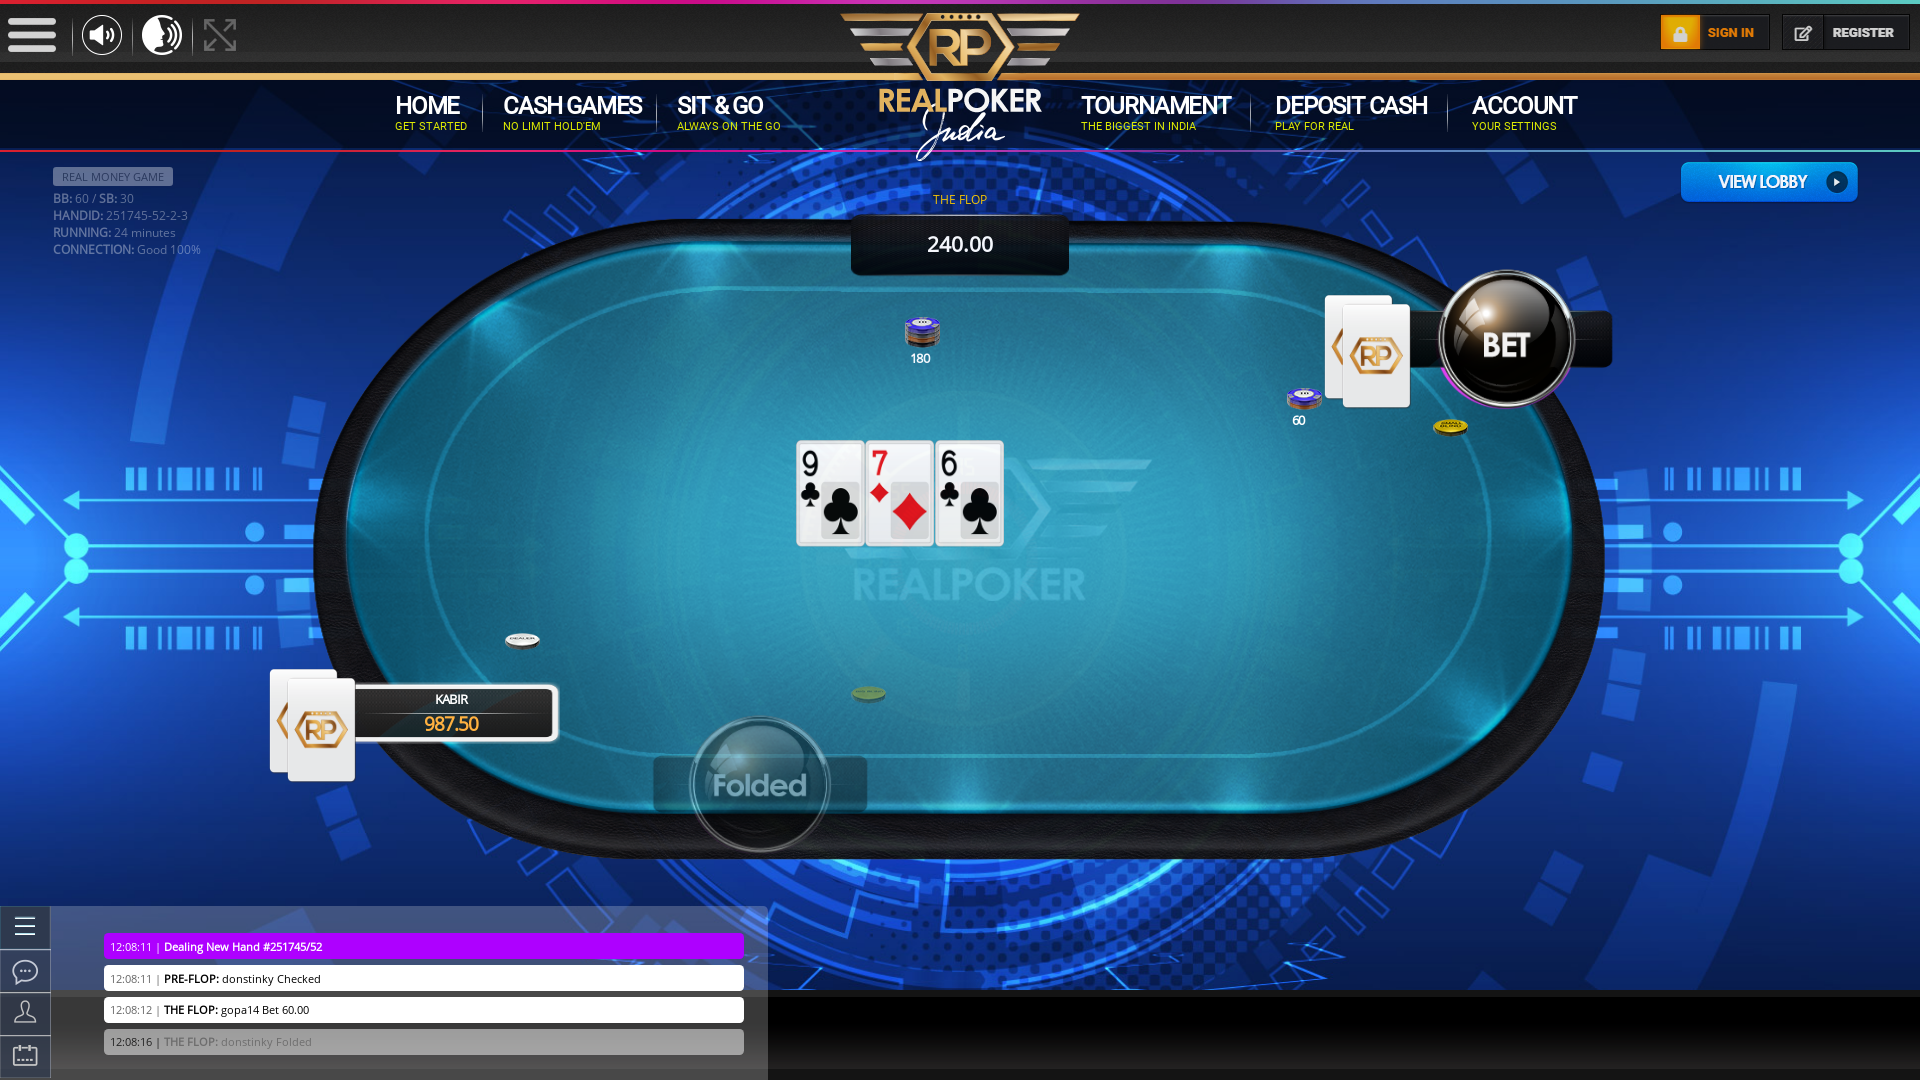 Indian online poker on a 10 player table in the 23rd minute match up